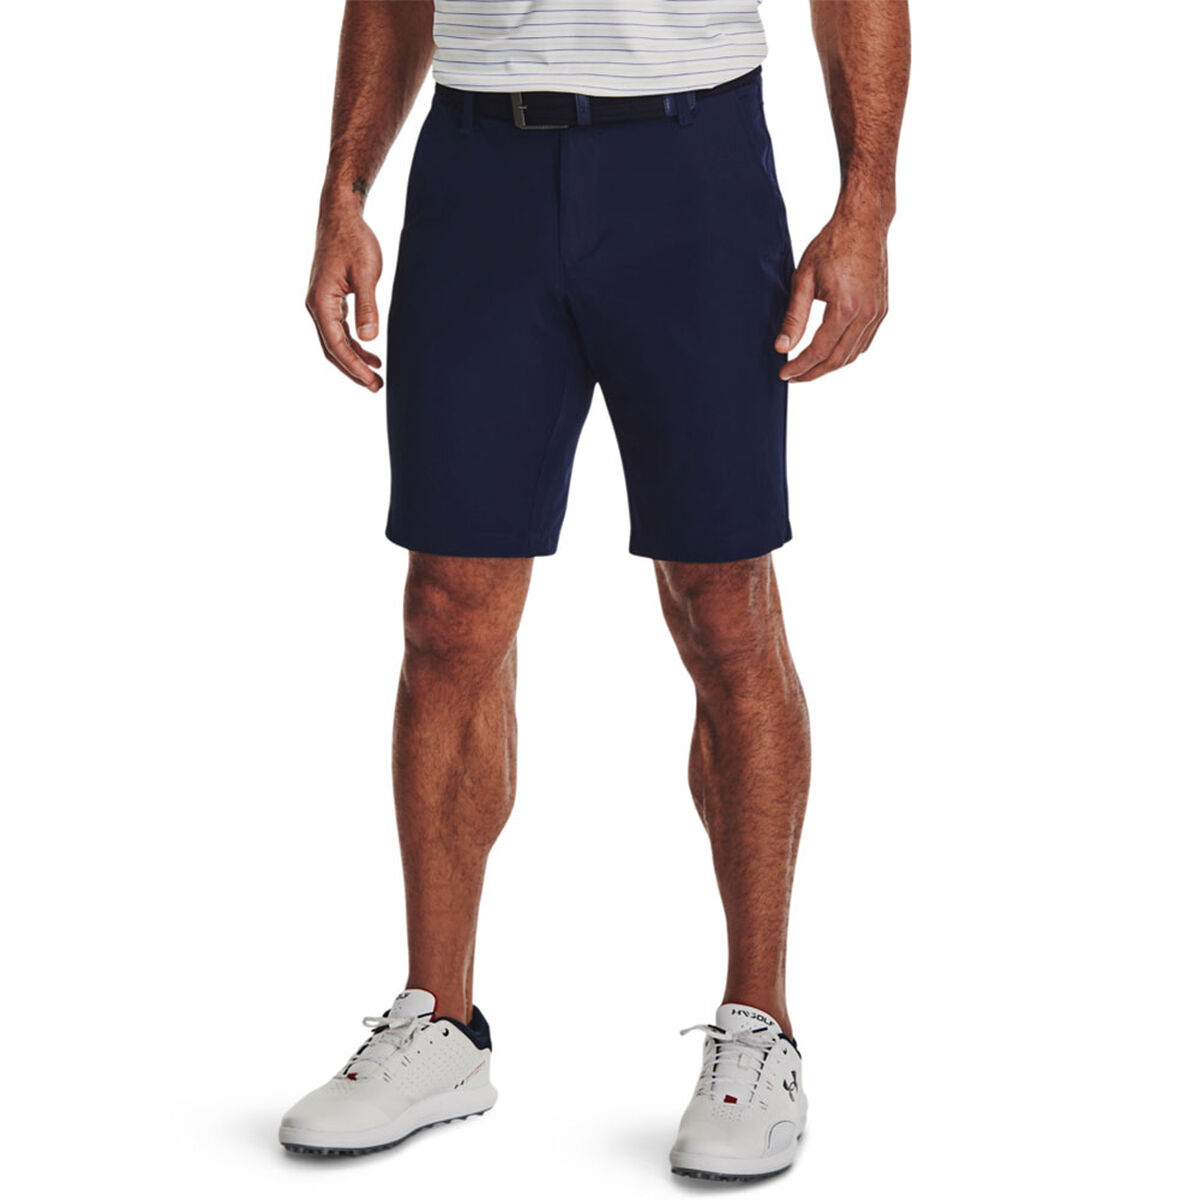 Under Armour Golf Shorts, Men’s Navy Blue and Grey Drive Tapered Stretch, Size: 30 | American Golf